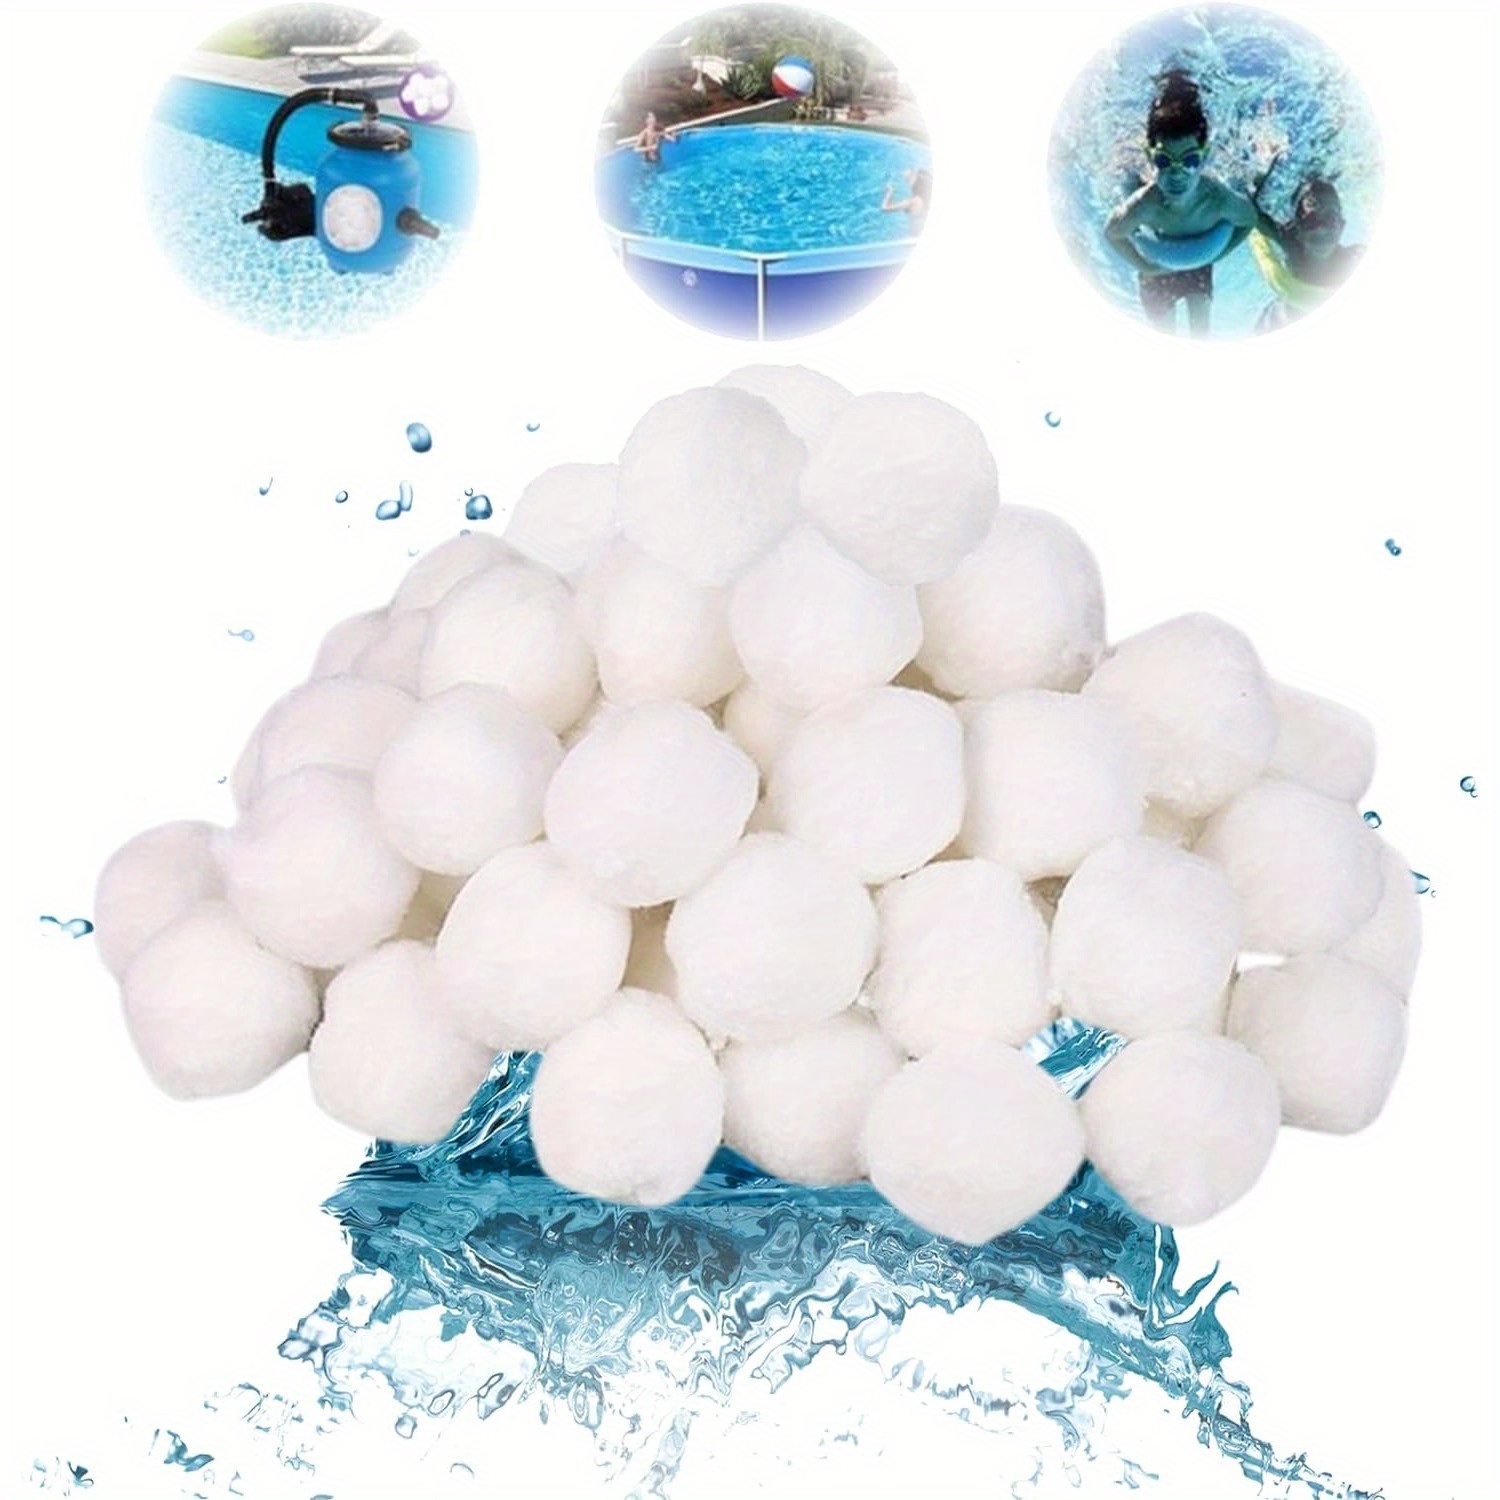 

1 Pack, Pool Filter Ball, A Reusable Alternative To Traditional Sand Filters, These Innovative Filter Balls Are Designed To Replace 50 Lbs Of Pool Filter Sand For Garden Swimming Pool